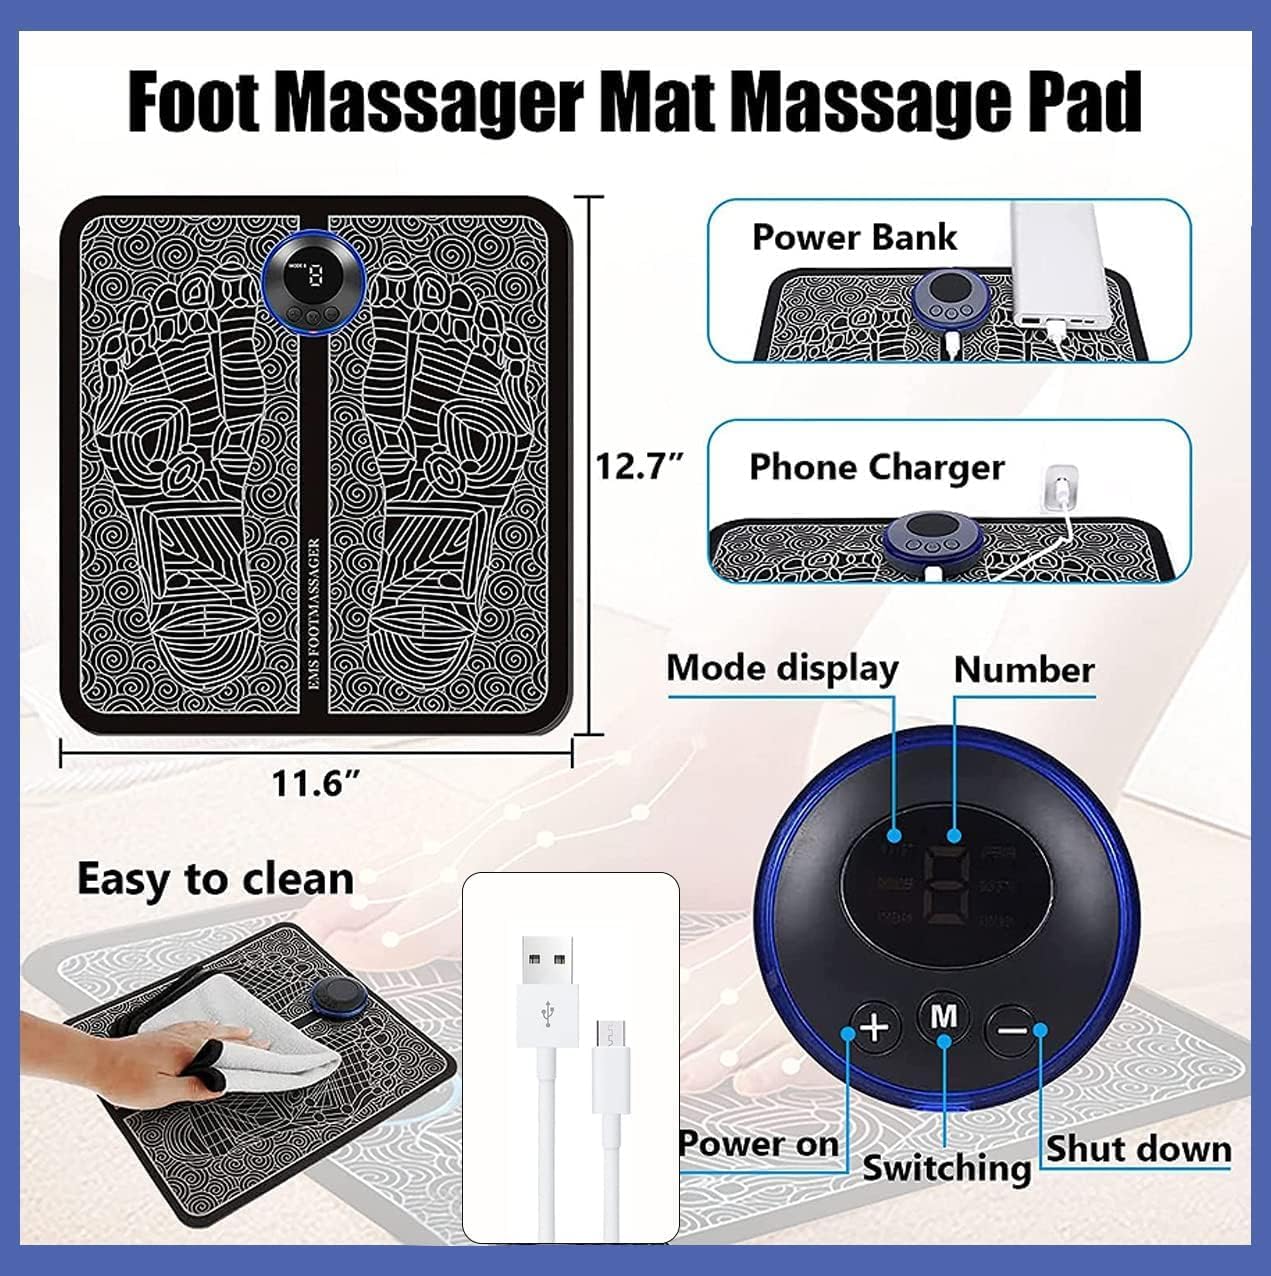 Accupoint Foot Massager, 8 modes, 19 intensity levels for ultimate pain relief